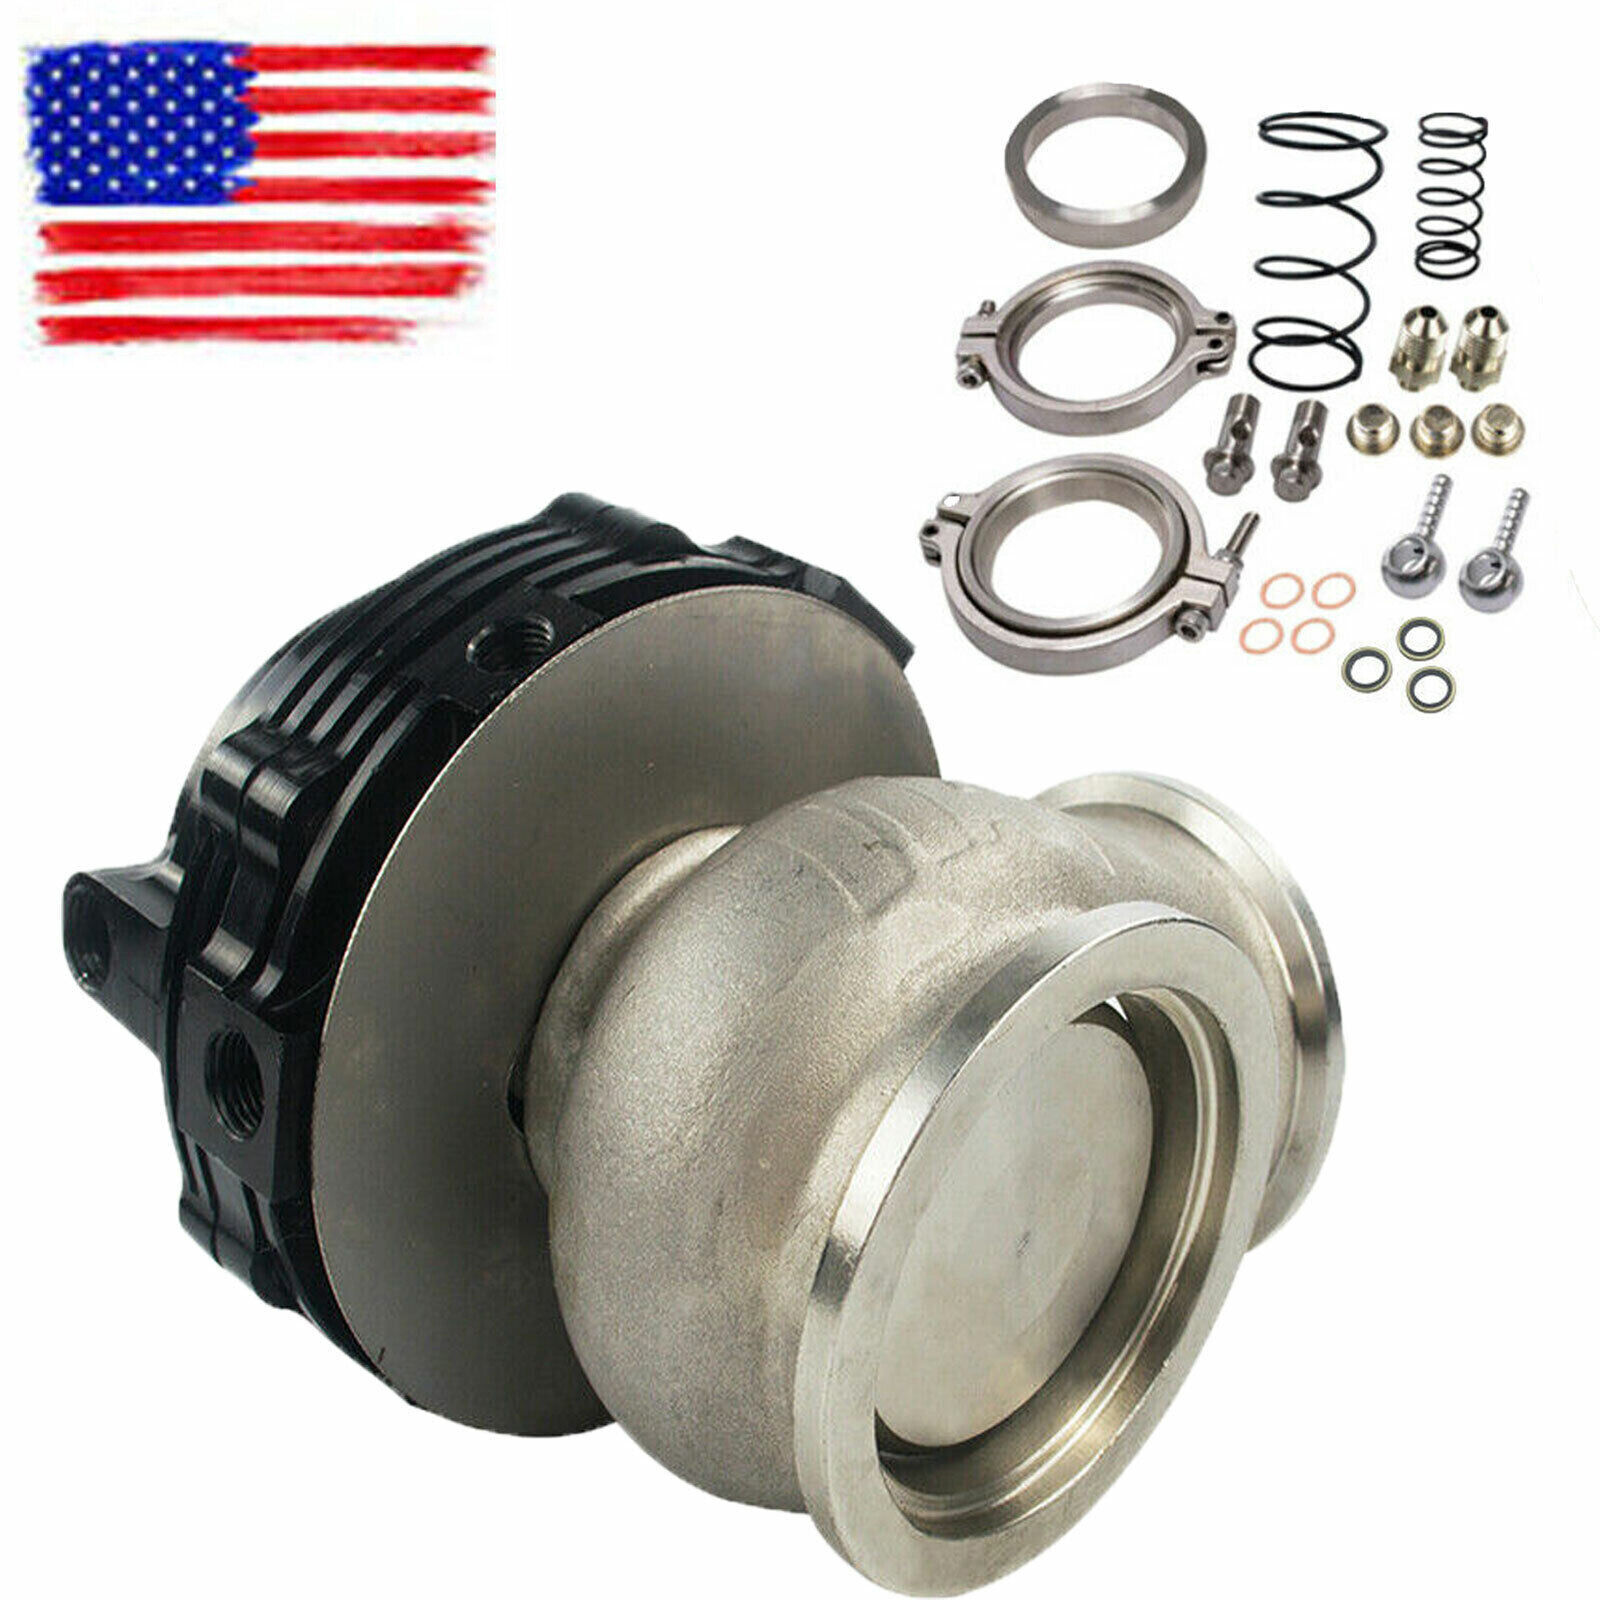 Fits Tial 44mm External Wastegate MVR V-Band Flange Turbo USA 2-3 Day Delivery